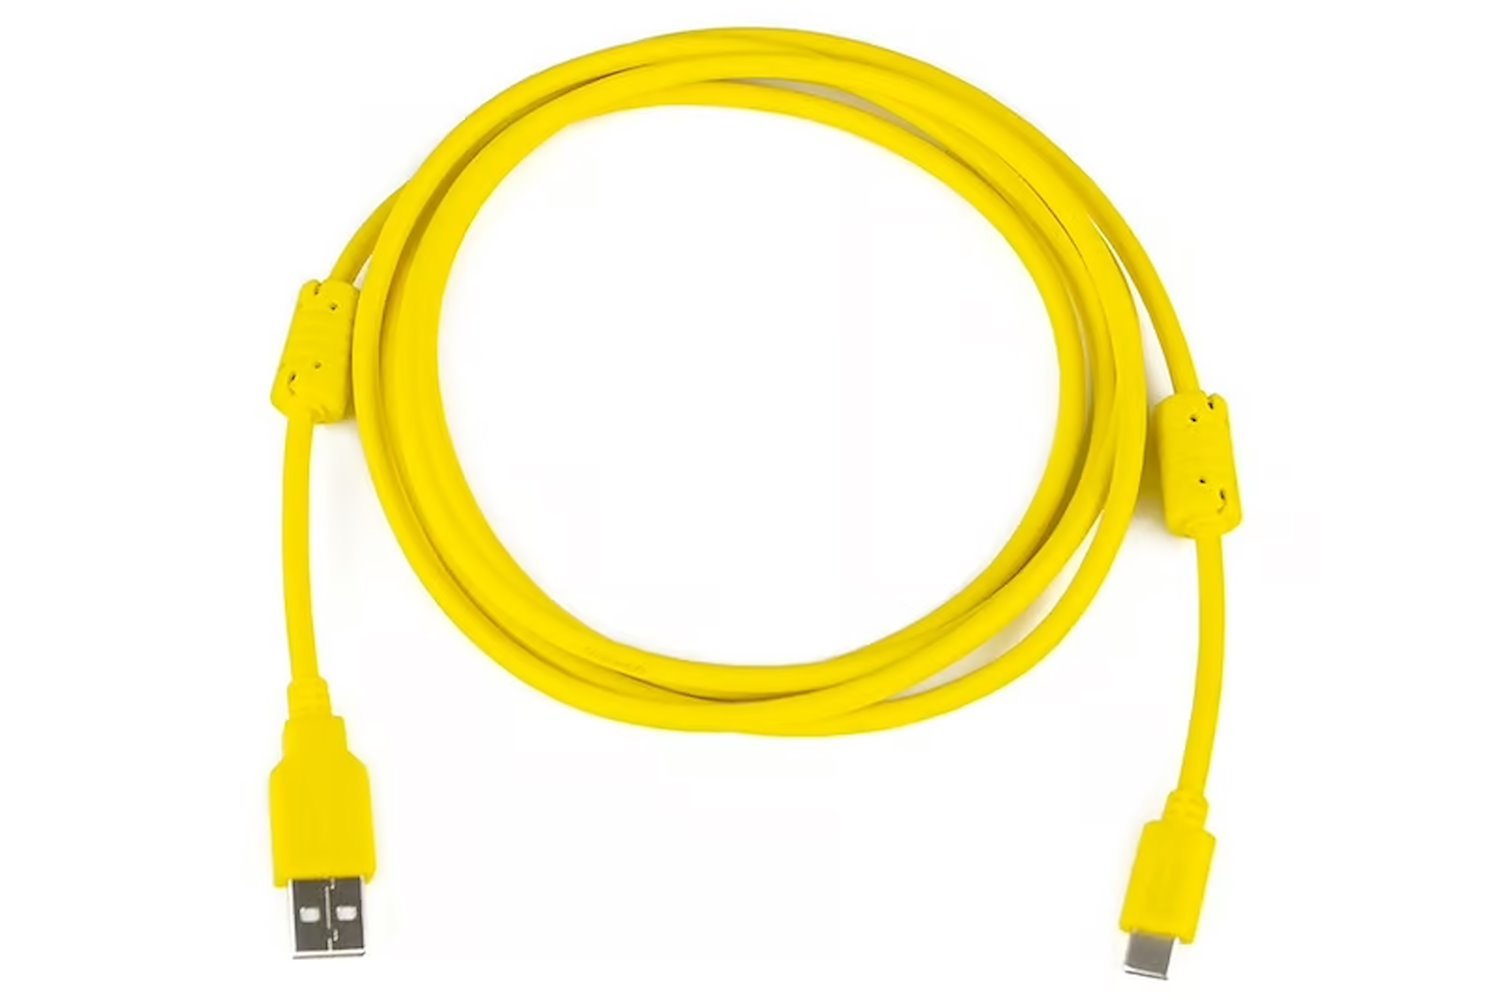 HT-070021 USB-A to USB-C Cable, 2.0M, Nexus